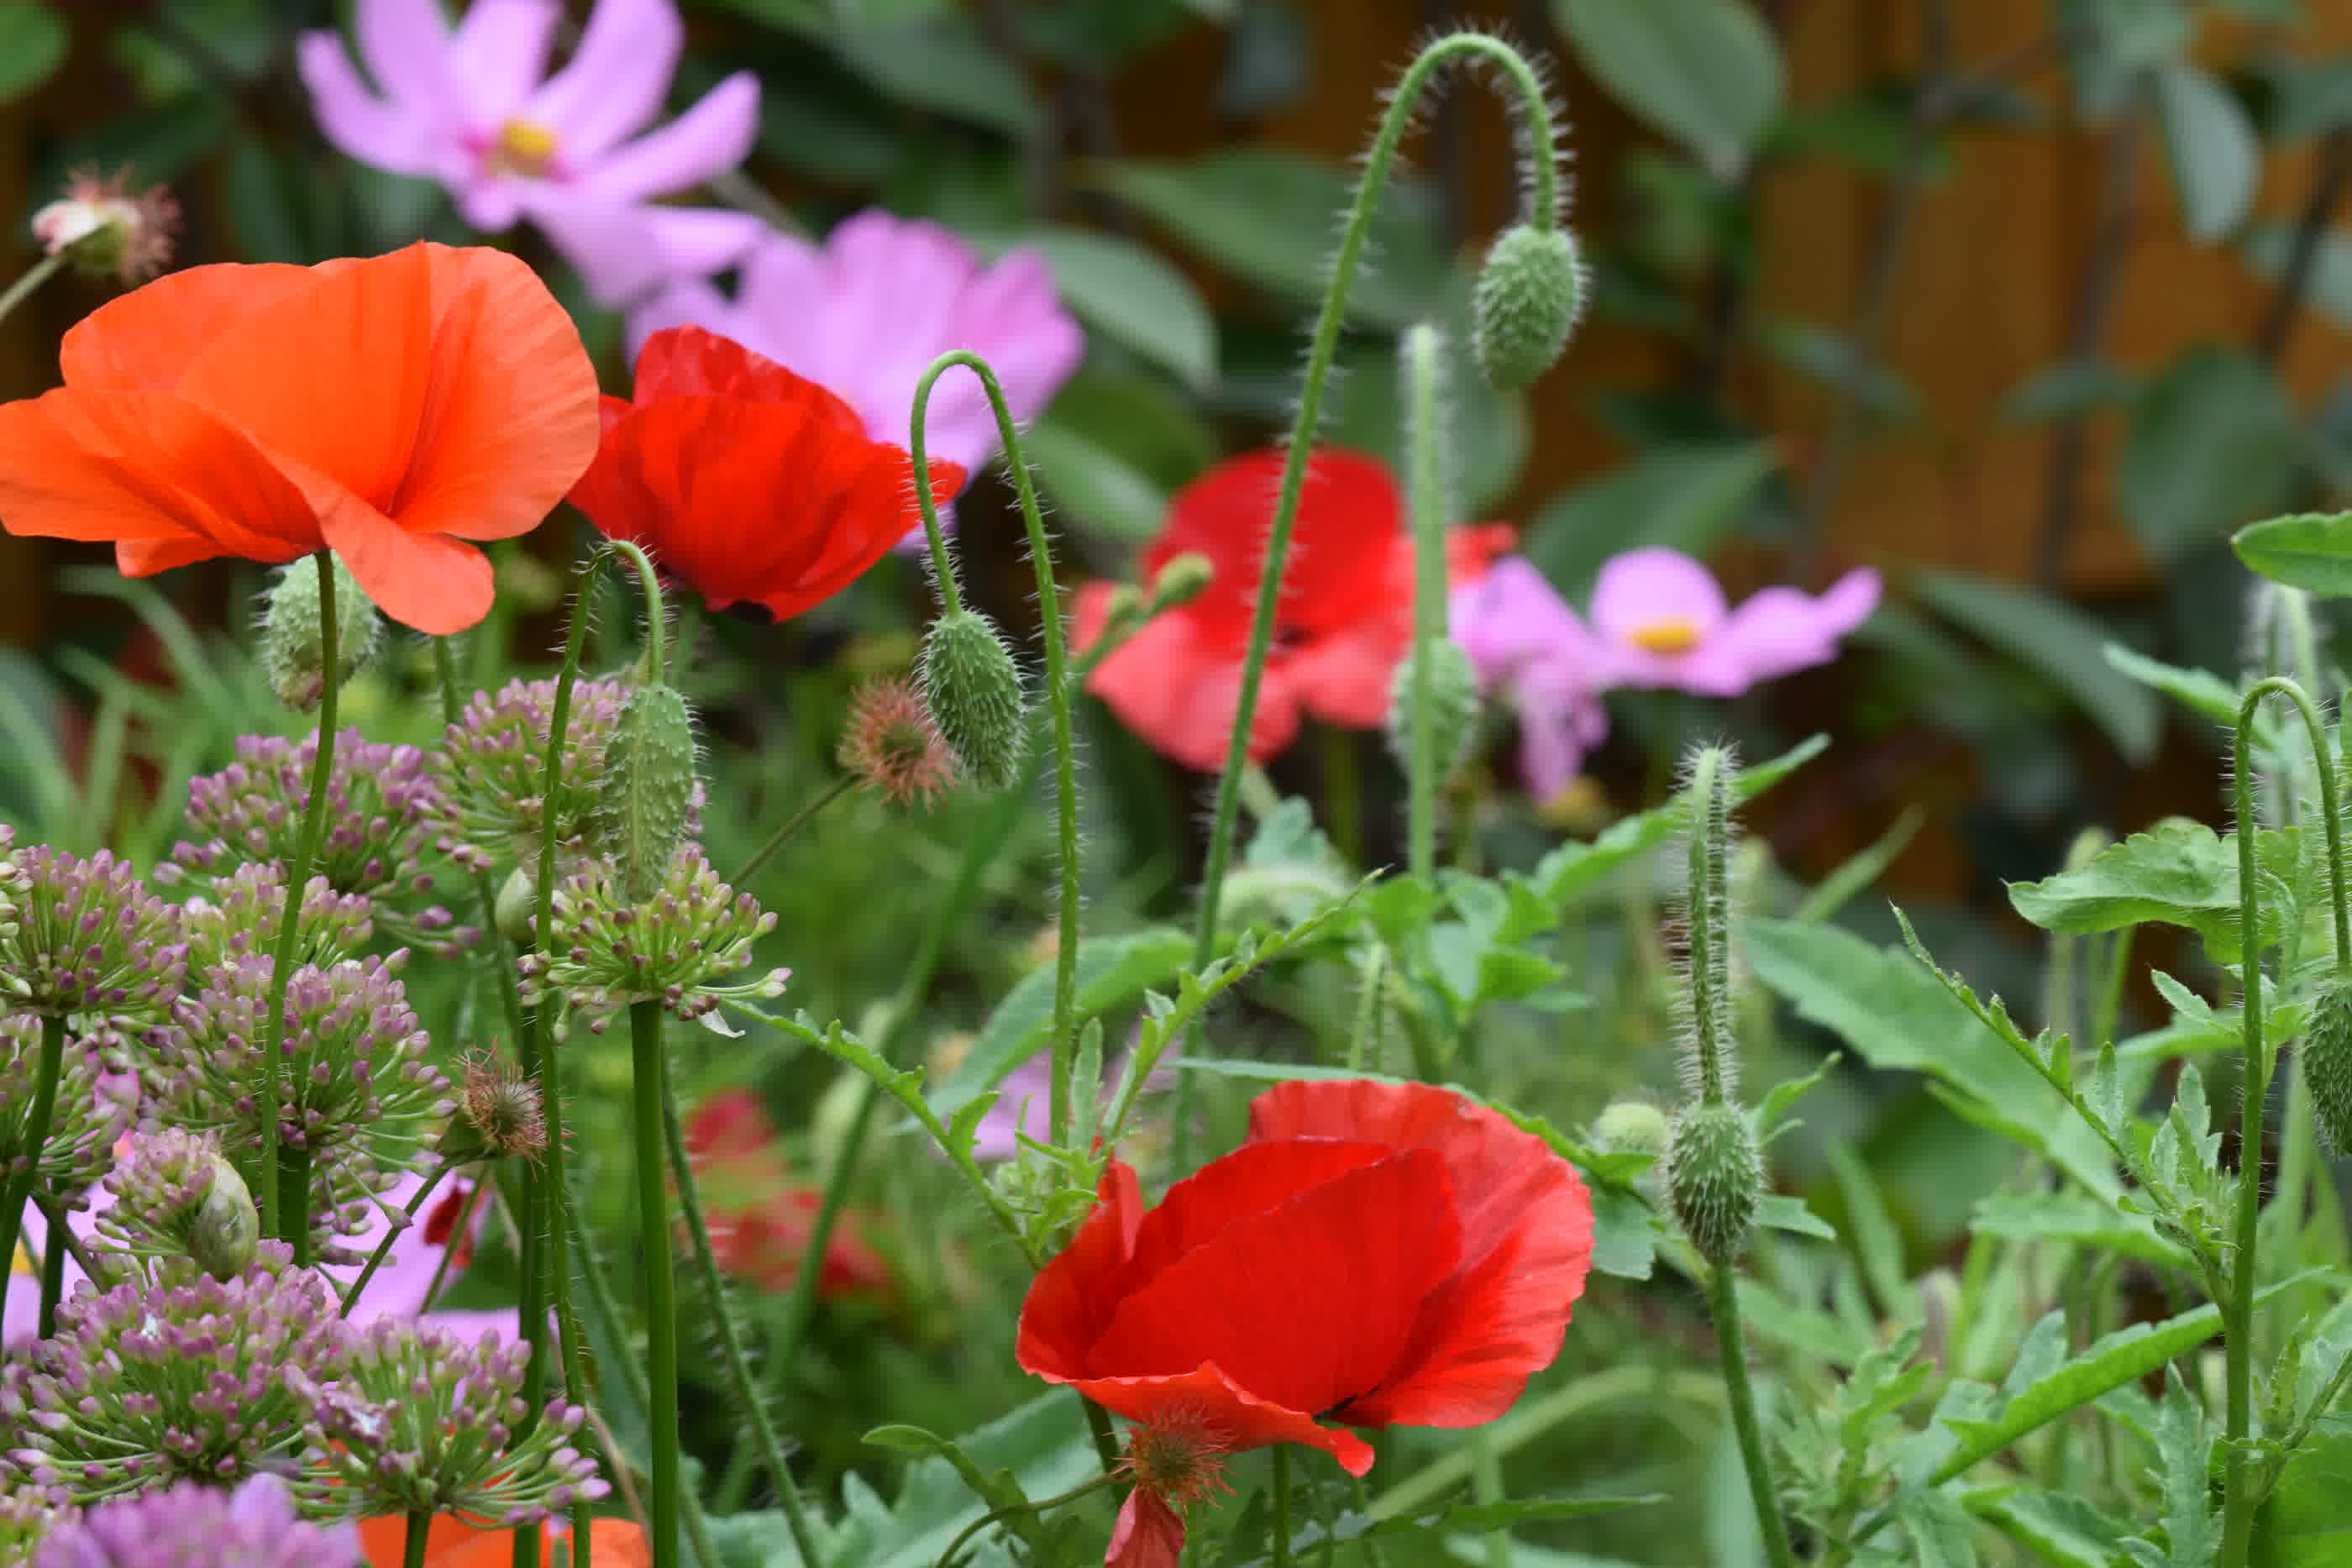 Red poppies and poppy buds